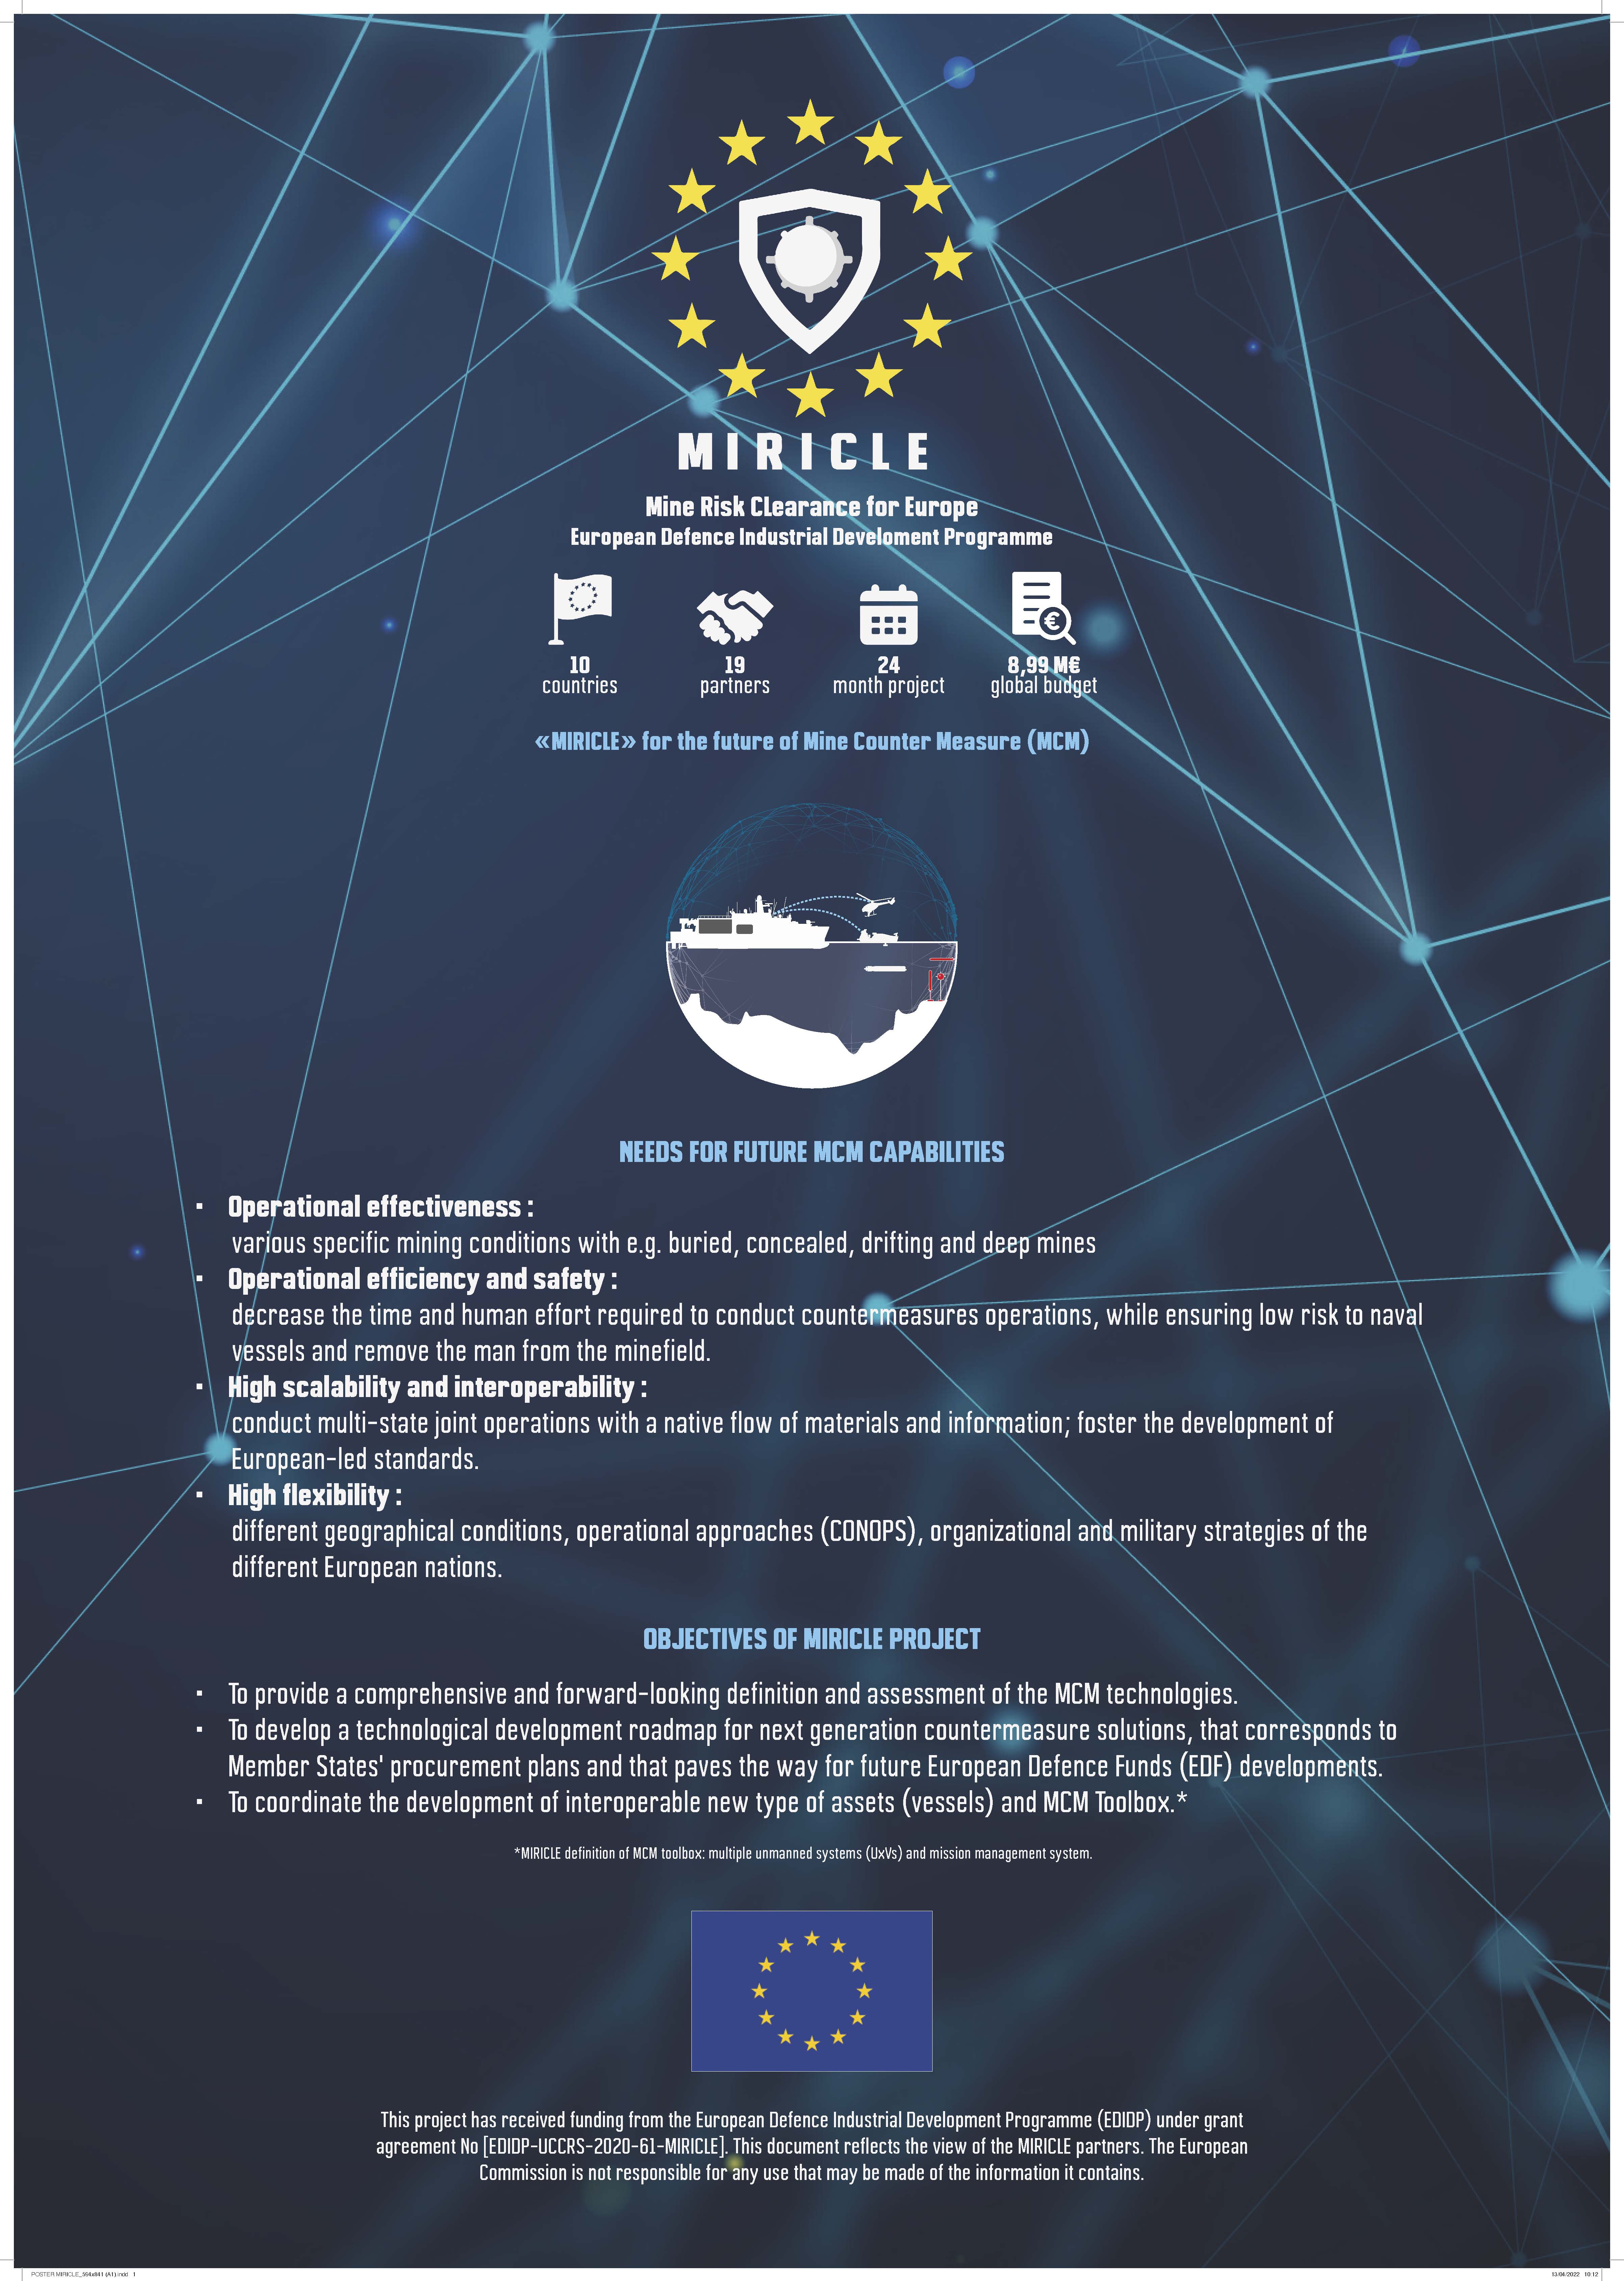 MIRICLE is an EDIDP (European Defence Industrial Development Programme) project aligned with the PESCO MAS MCM (Maritime Semi-Autonomous Mine Counter Measures) project. The project, which started on 1 December 2021, has a duration of 24 months and is led by Naval Group -Belgium- with the participation of 19 companies, including SAES.